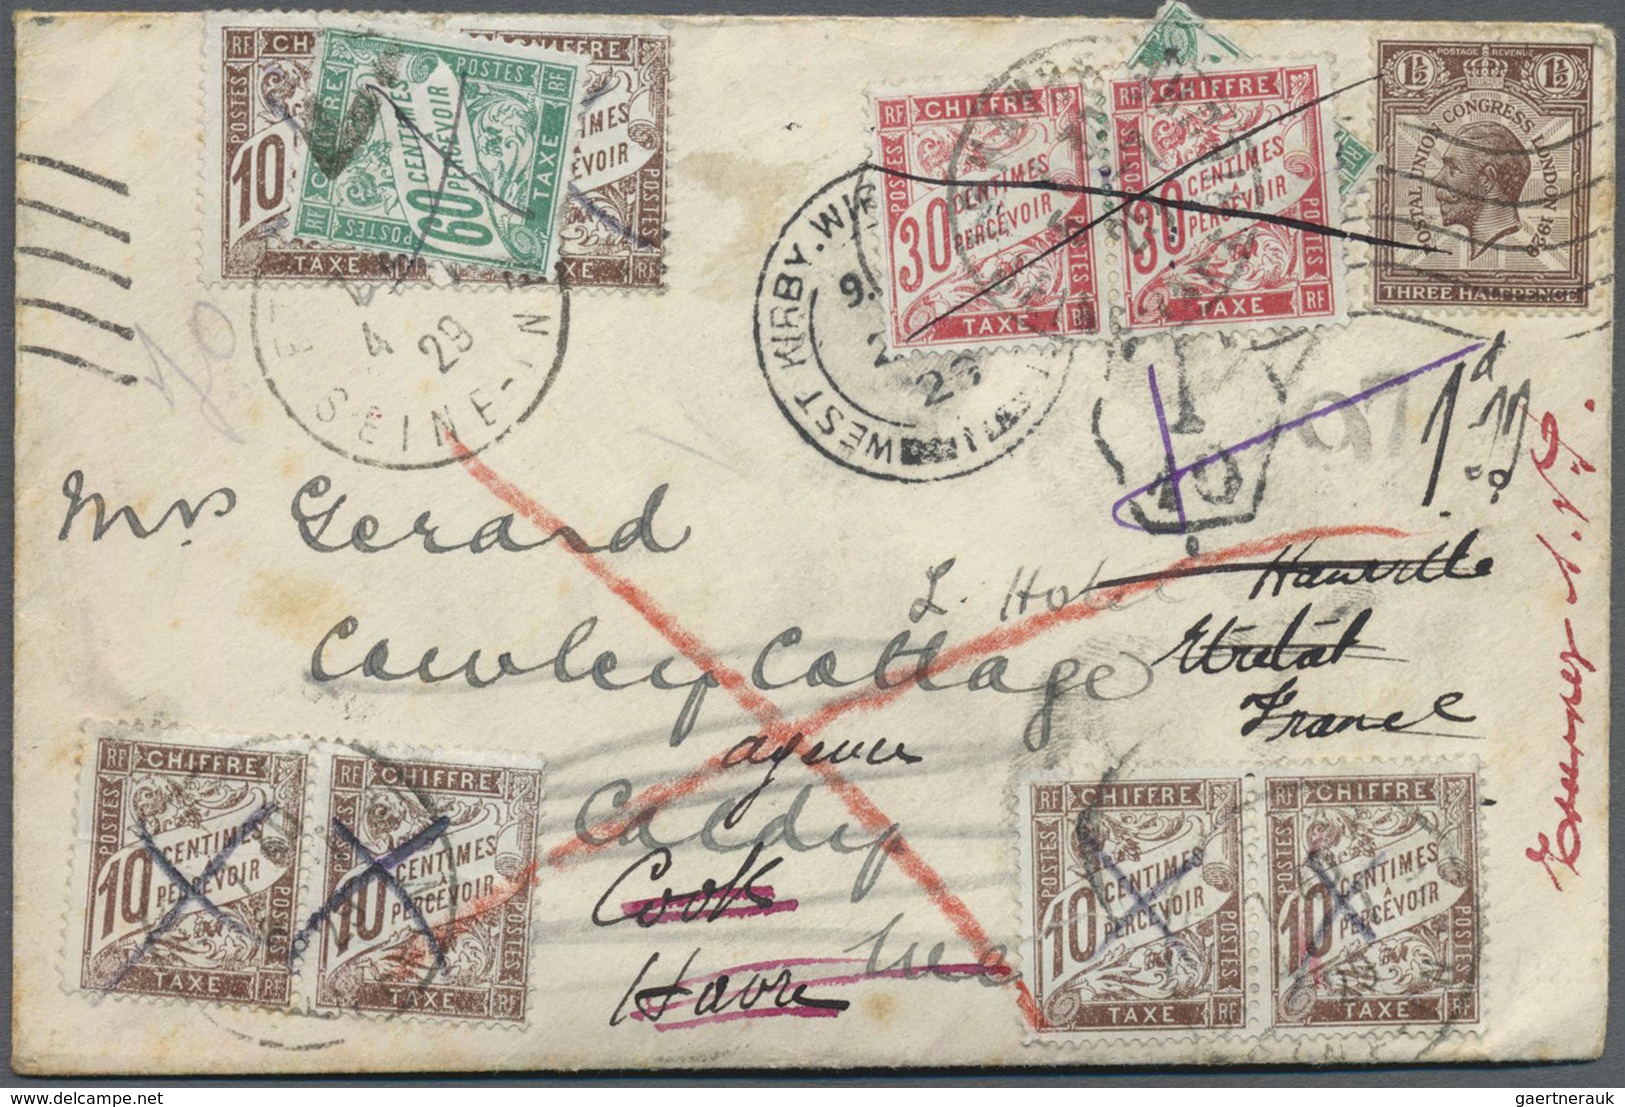 Br Frankreich - Portomarken: 1870/1980 (ca.), insufficiently paid incoming mail, accumulation of apprx.